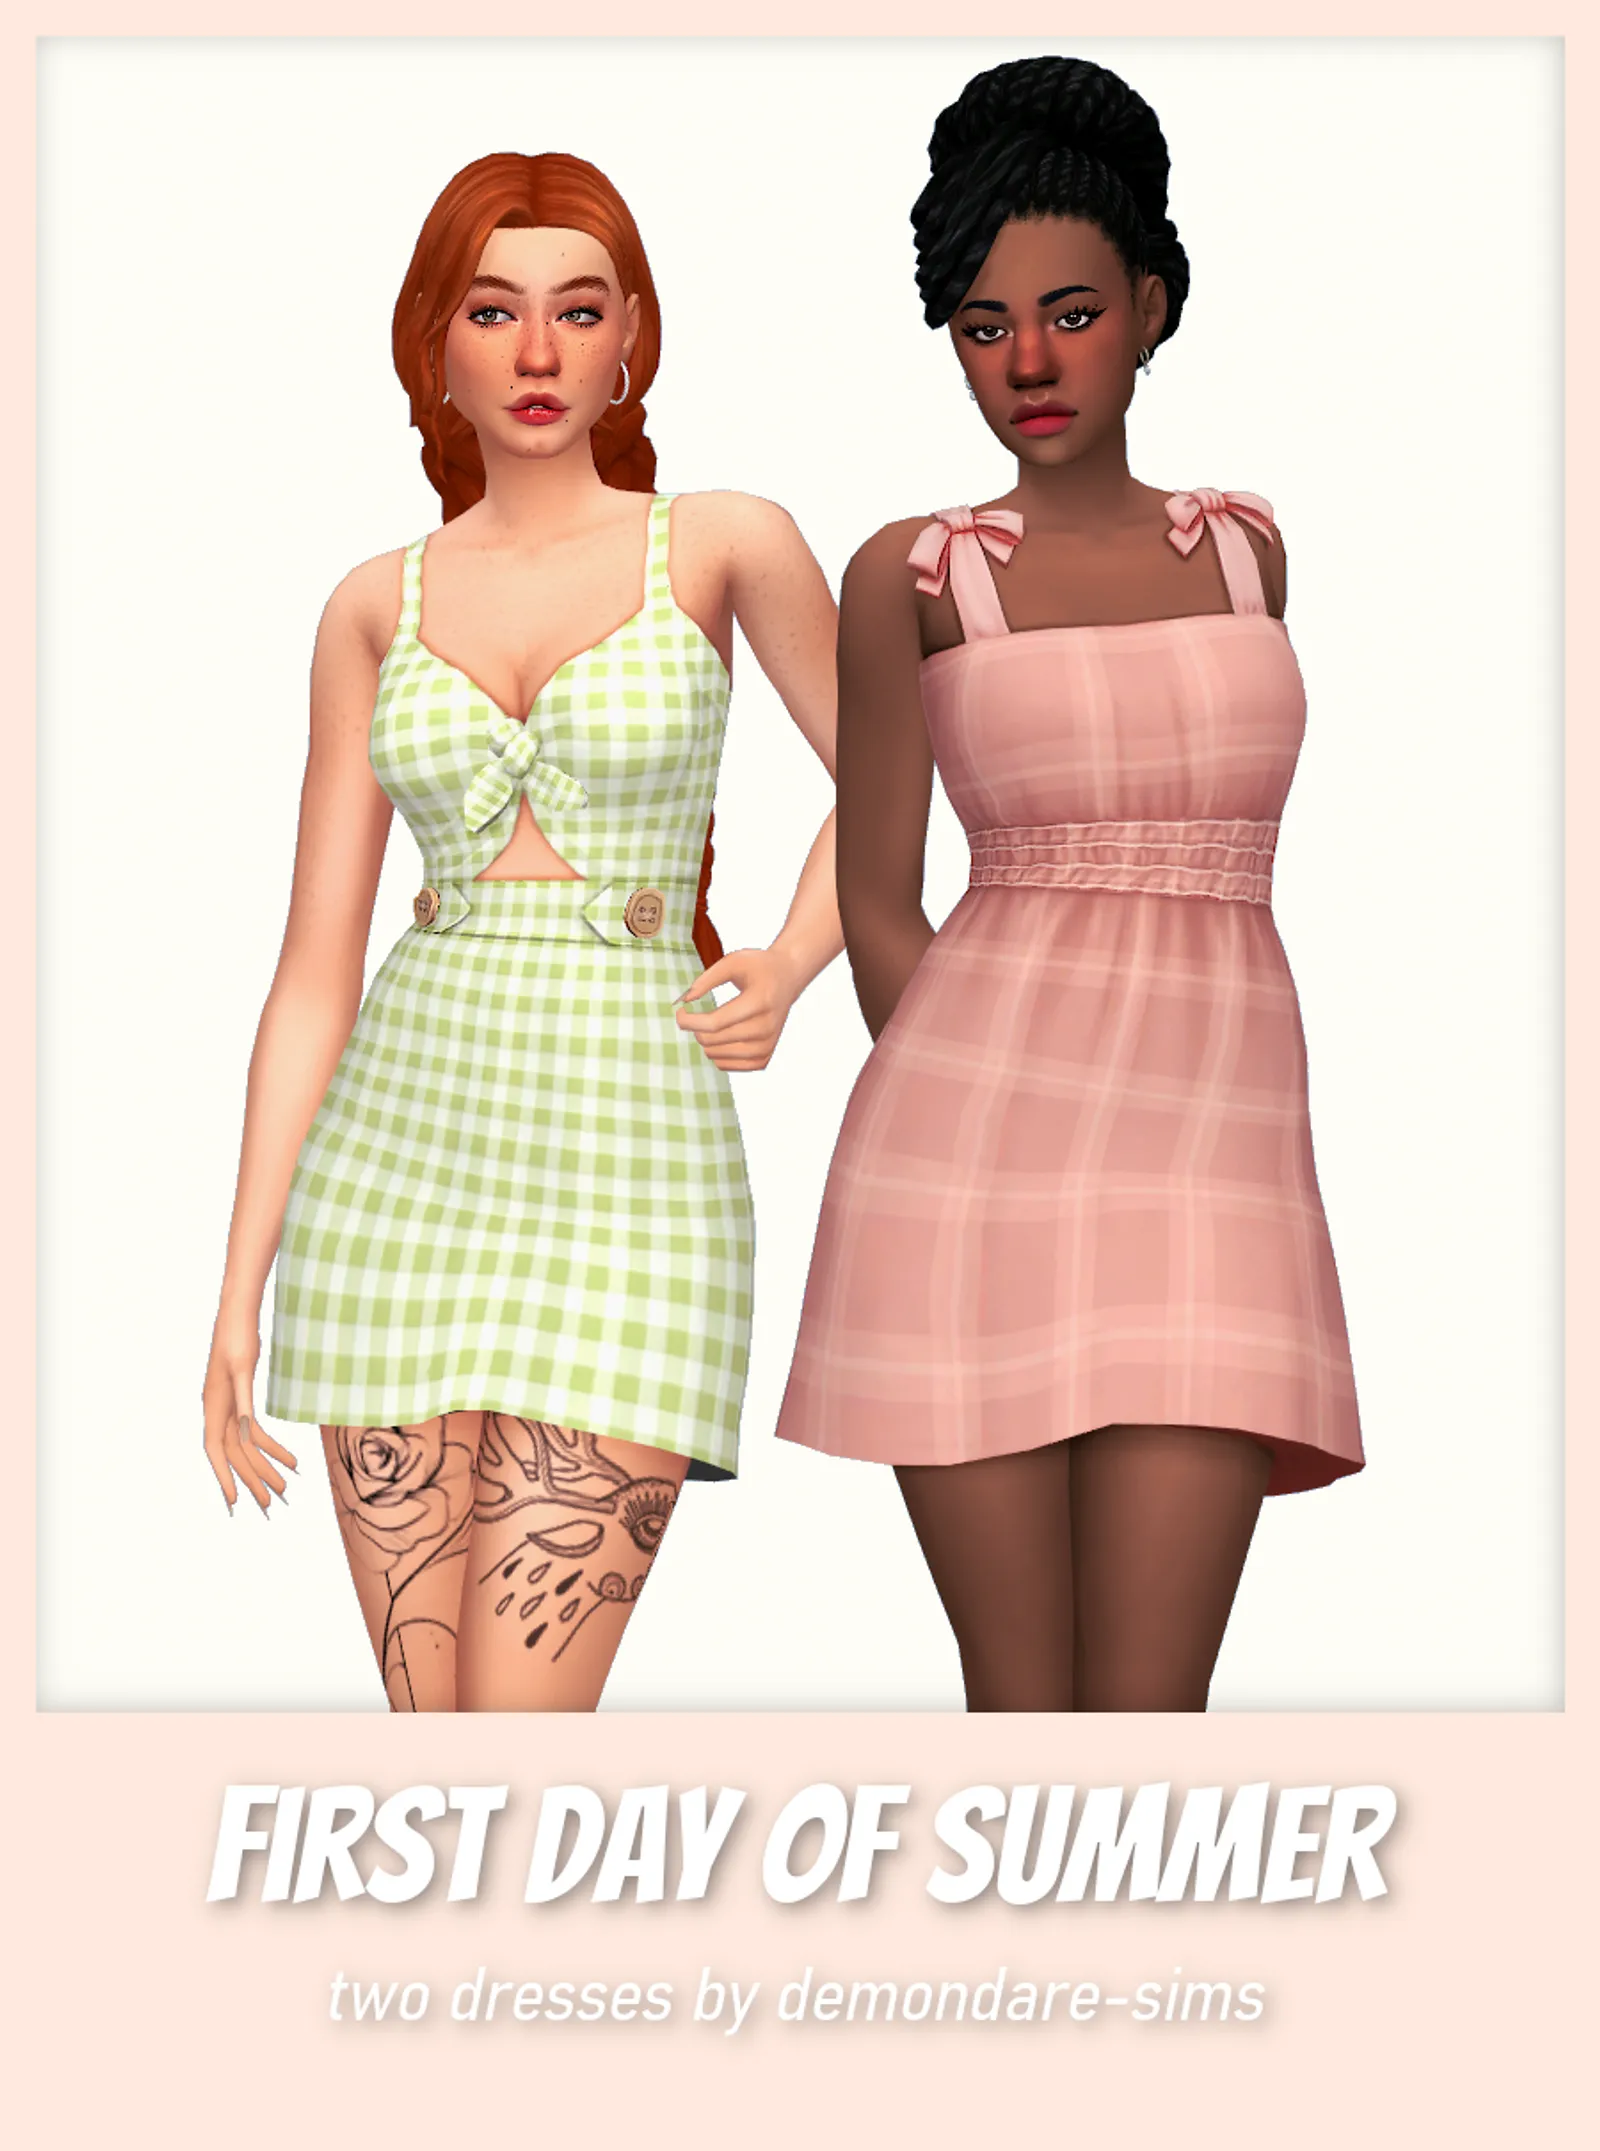 First Day of Summer - a set of two dresses